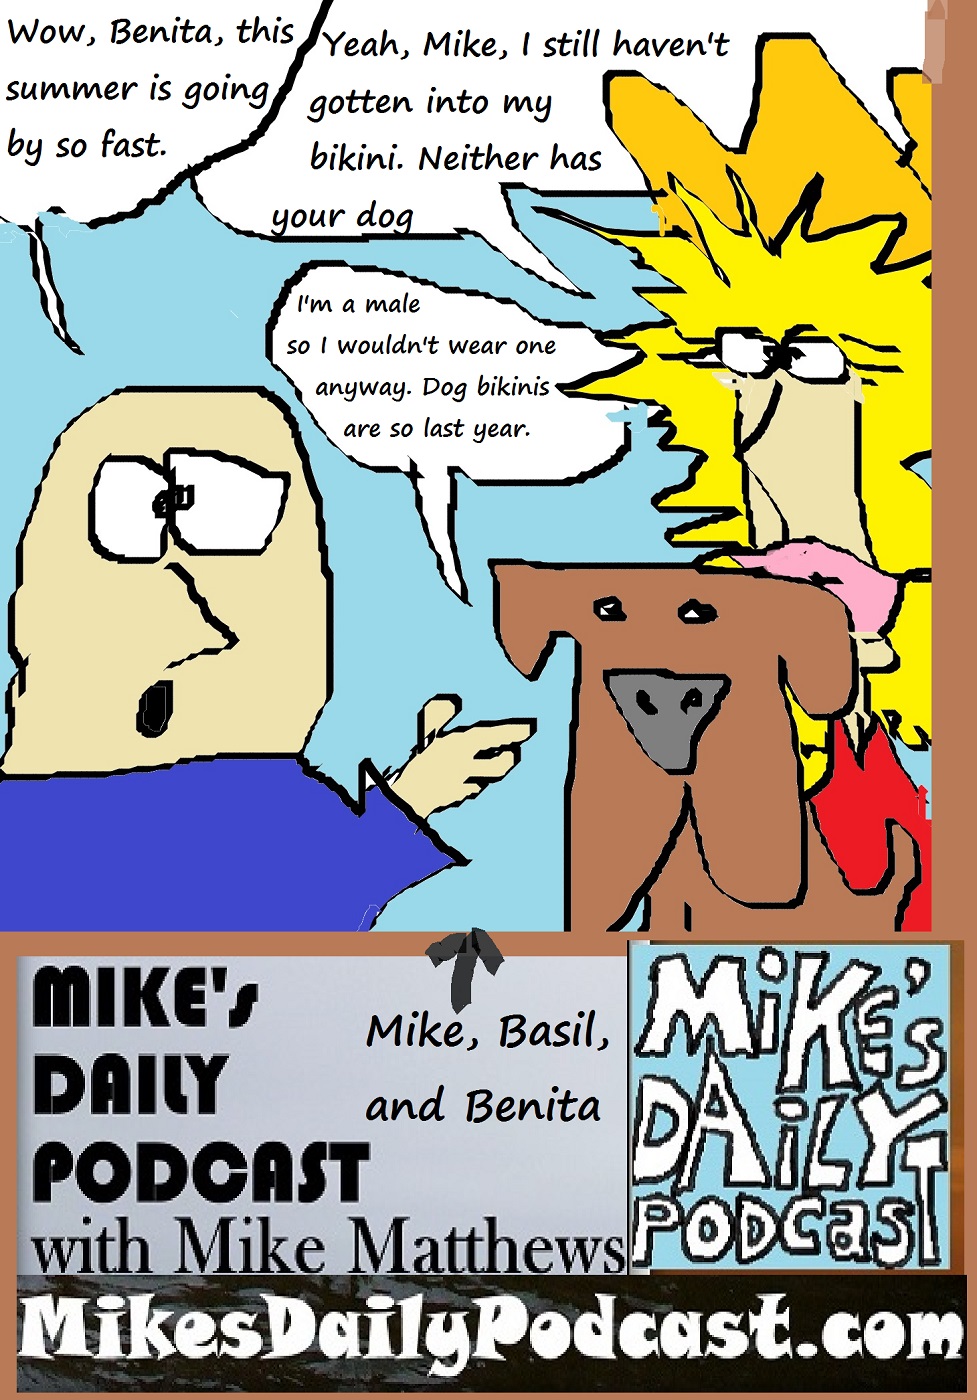 MIKEs DAILY PODCAST 1127 Benita Basil and Mike